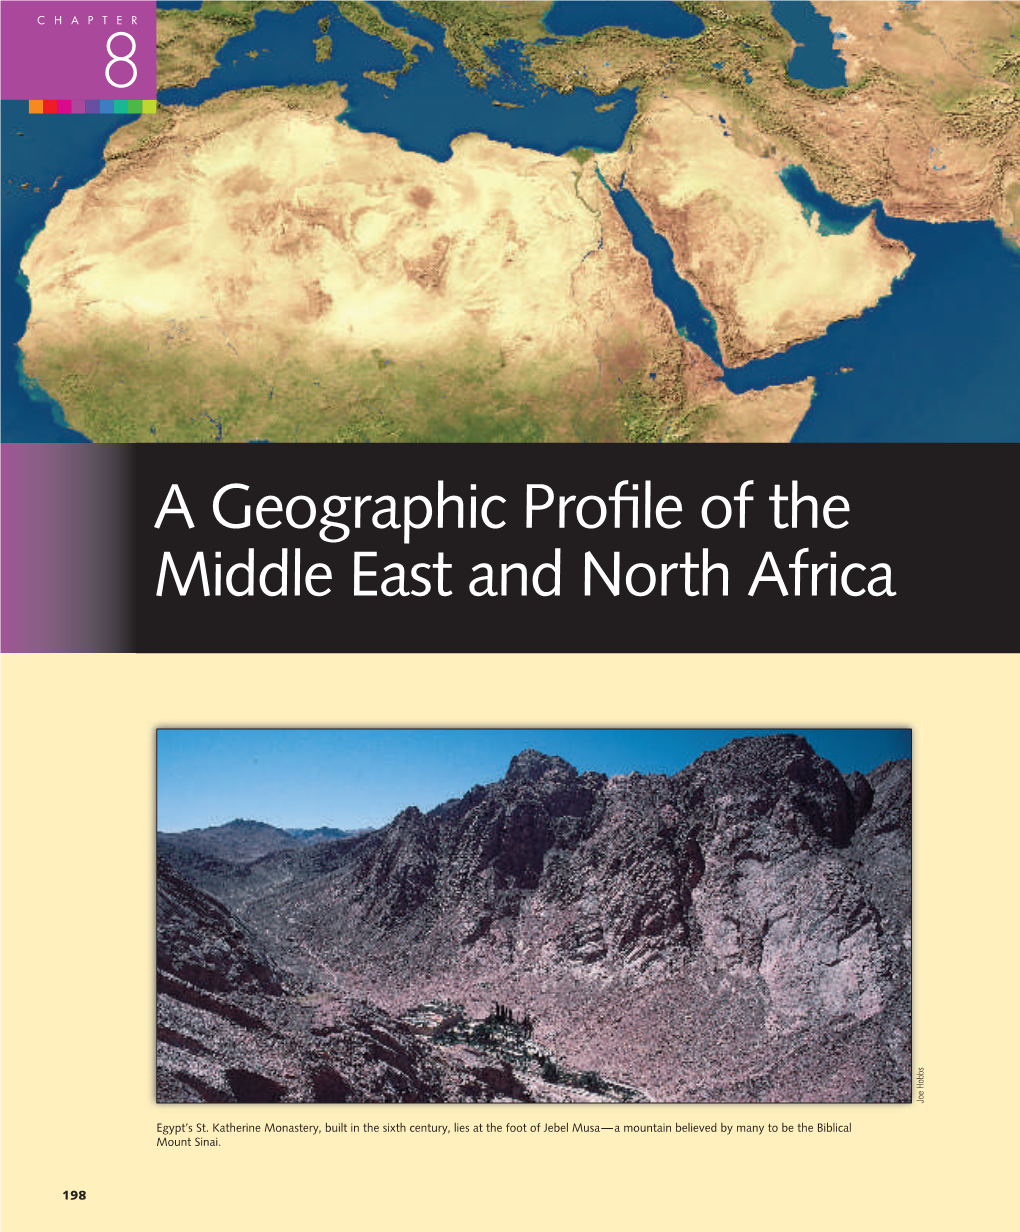 A Geographic Profile of the Middle East and North Africa